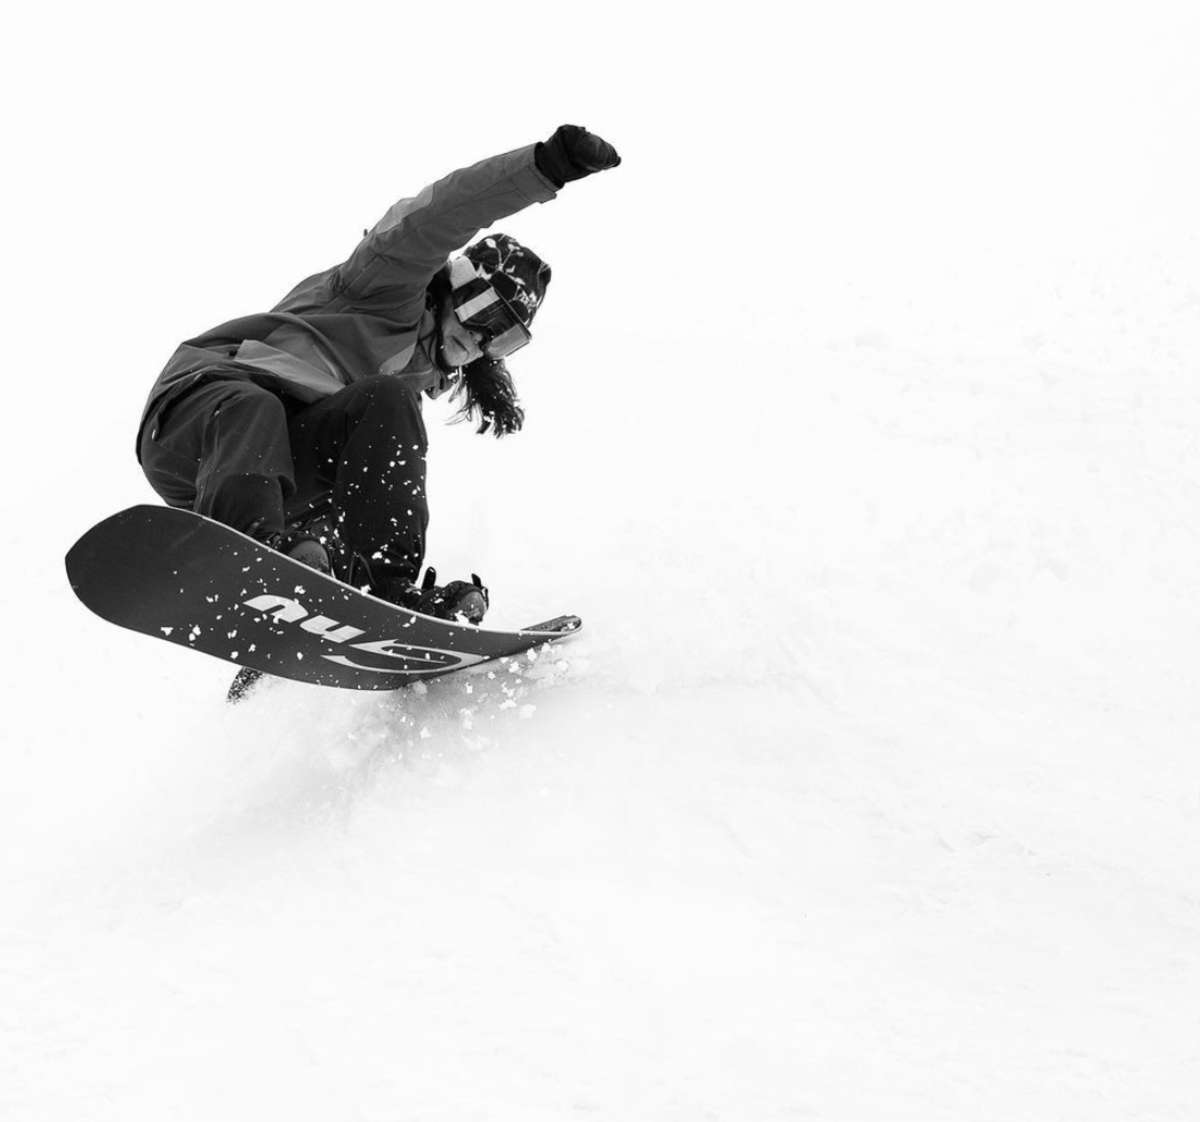 It's Tits: Snowboarding's Fight Against Breast Cancer - Snowboarder